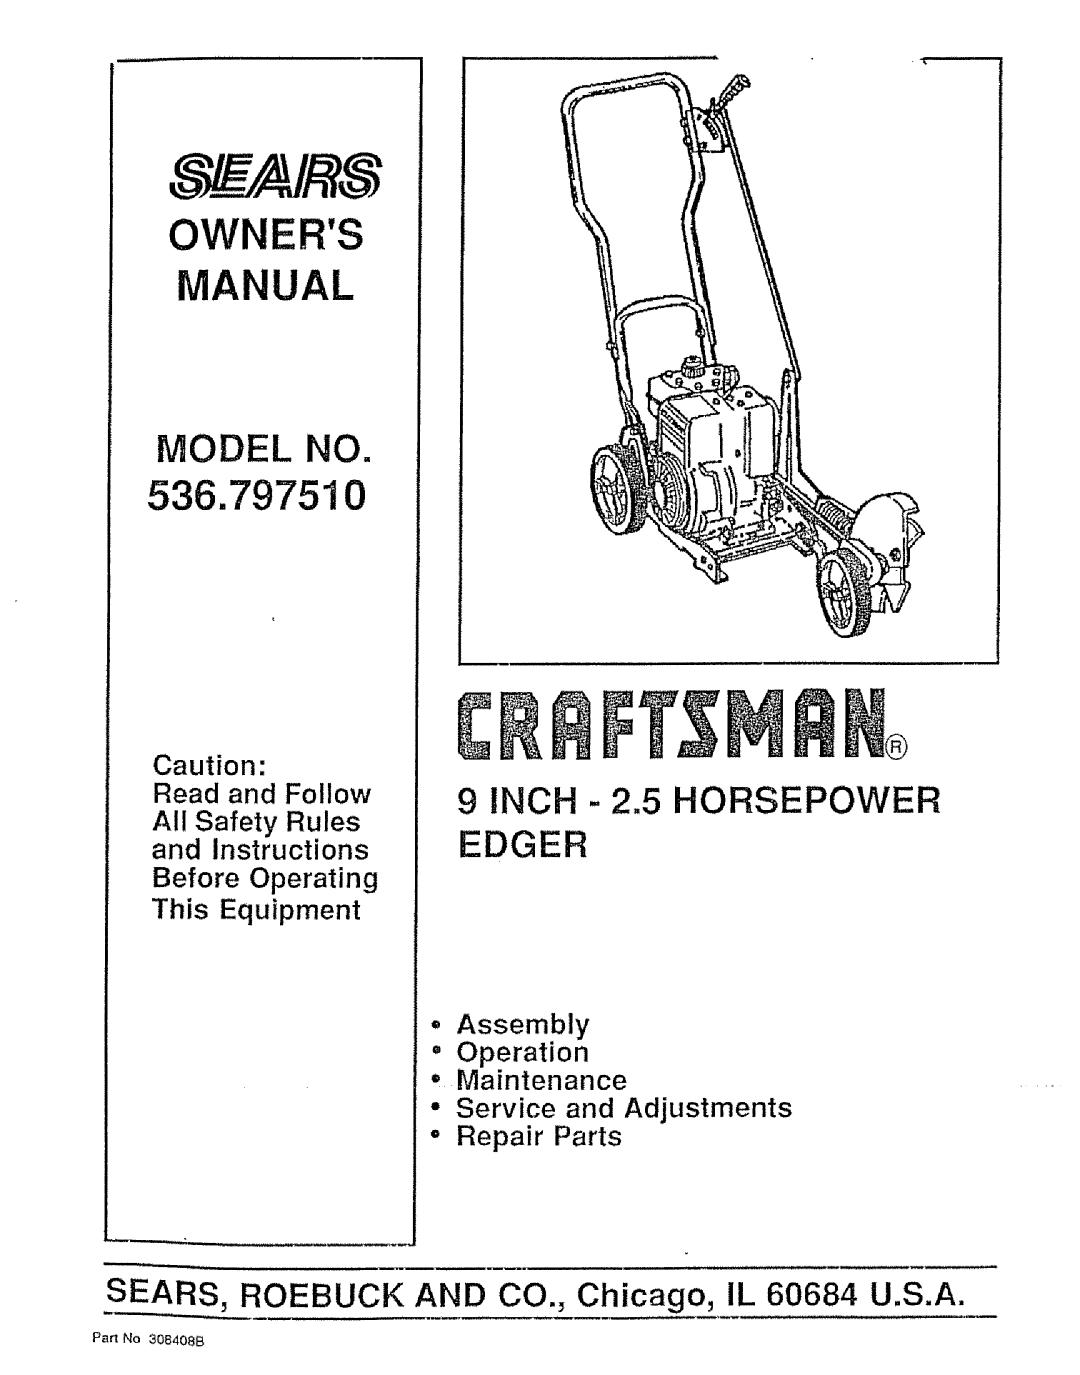 Sears owner manual 536.797510, INCH- 2.5 HORSEPOWER EDGER, Read and Follow All Safety Rules and Instructions, Owners 